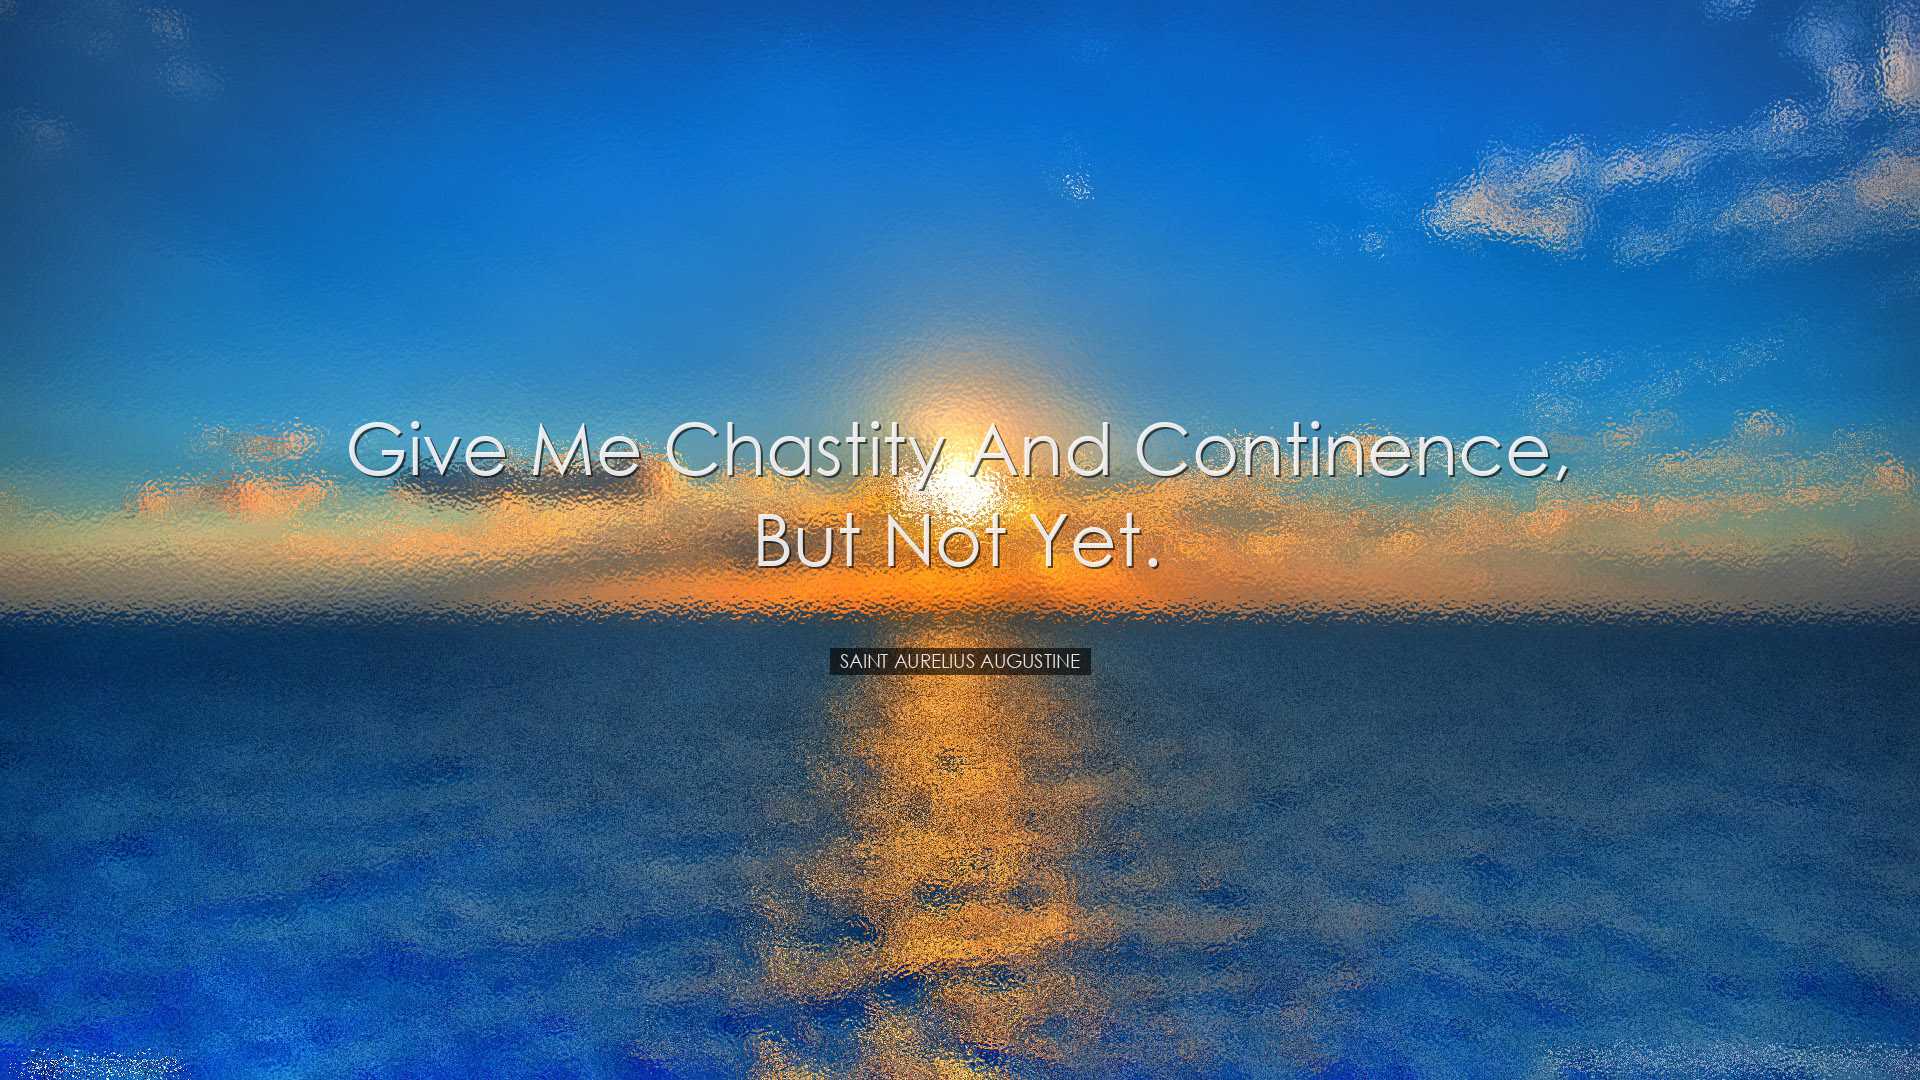 Give me chastity and continence, but not yet. - Saint Aurelius Aug